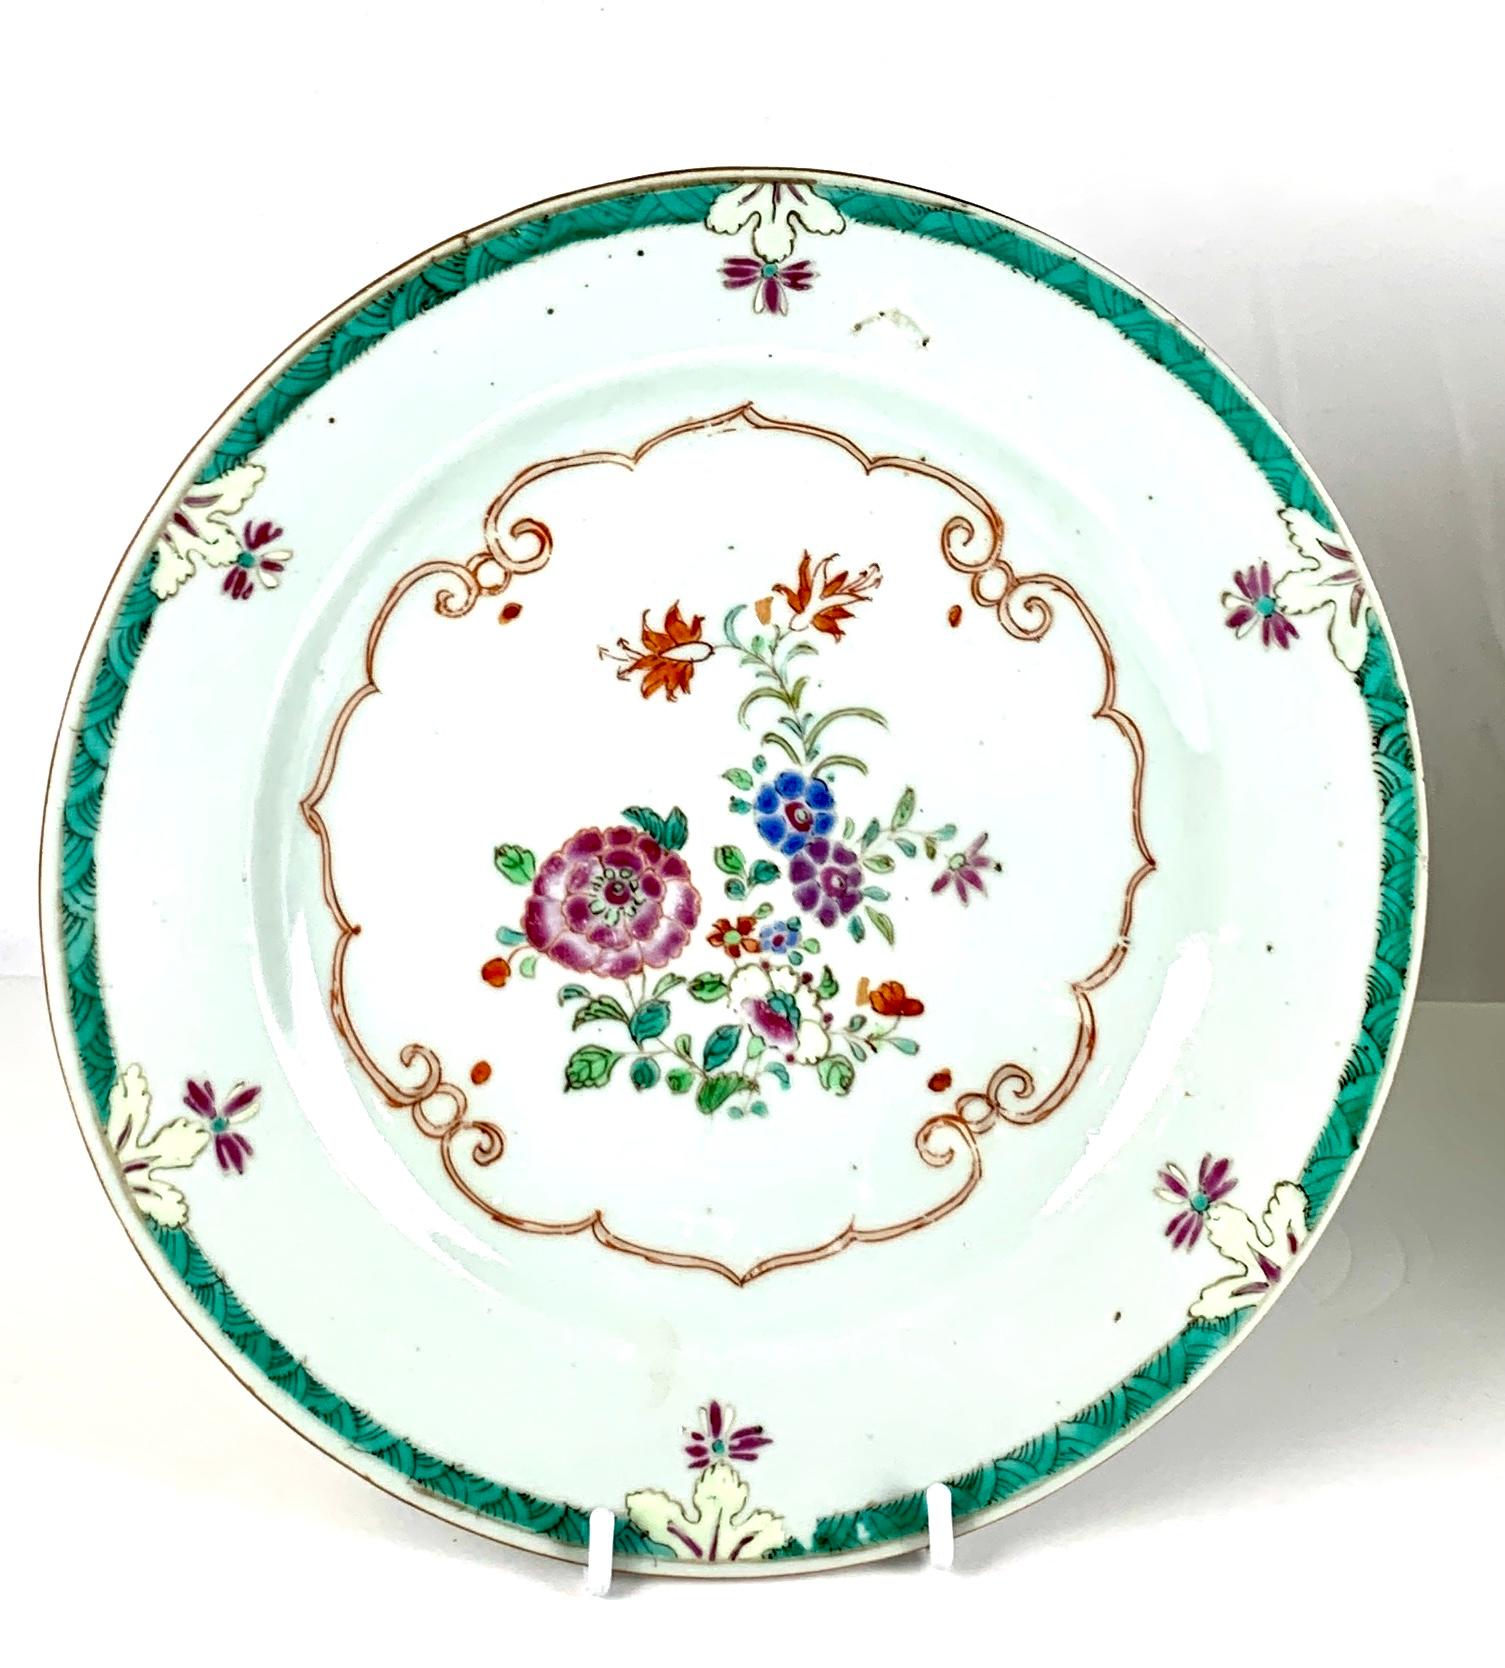 This pair of beautiful Chinese porcelain plates were hand painted in the Famille Rose style in the mid-18th century. 
The center of each plate is painted in delicate colored enamels. 
Many small green leaves enhance lovely flowers painted in purple,